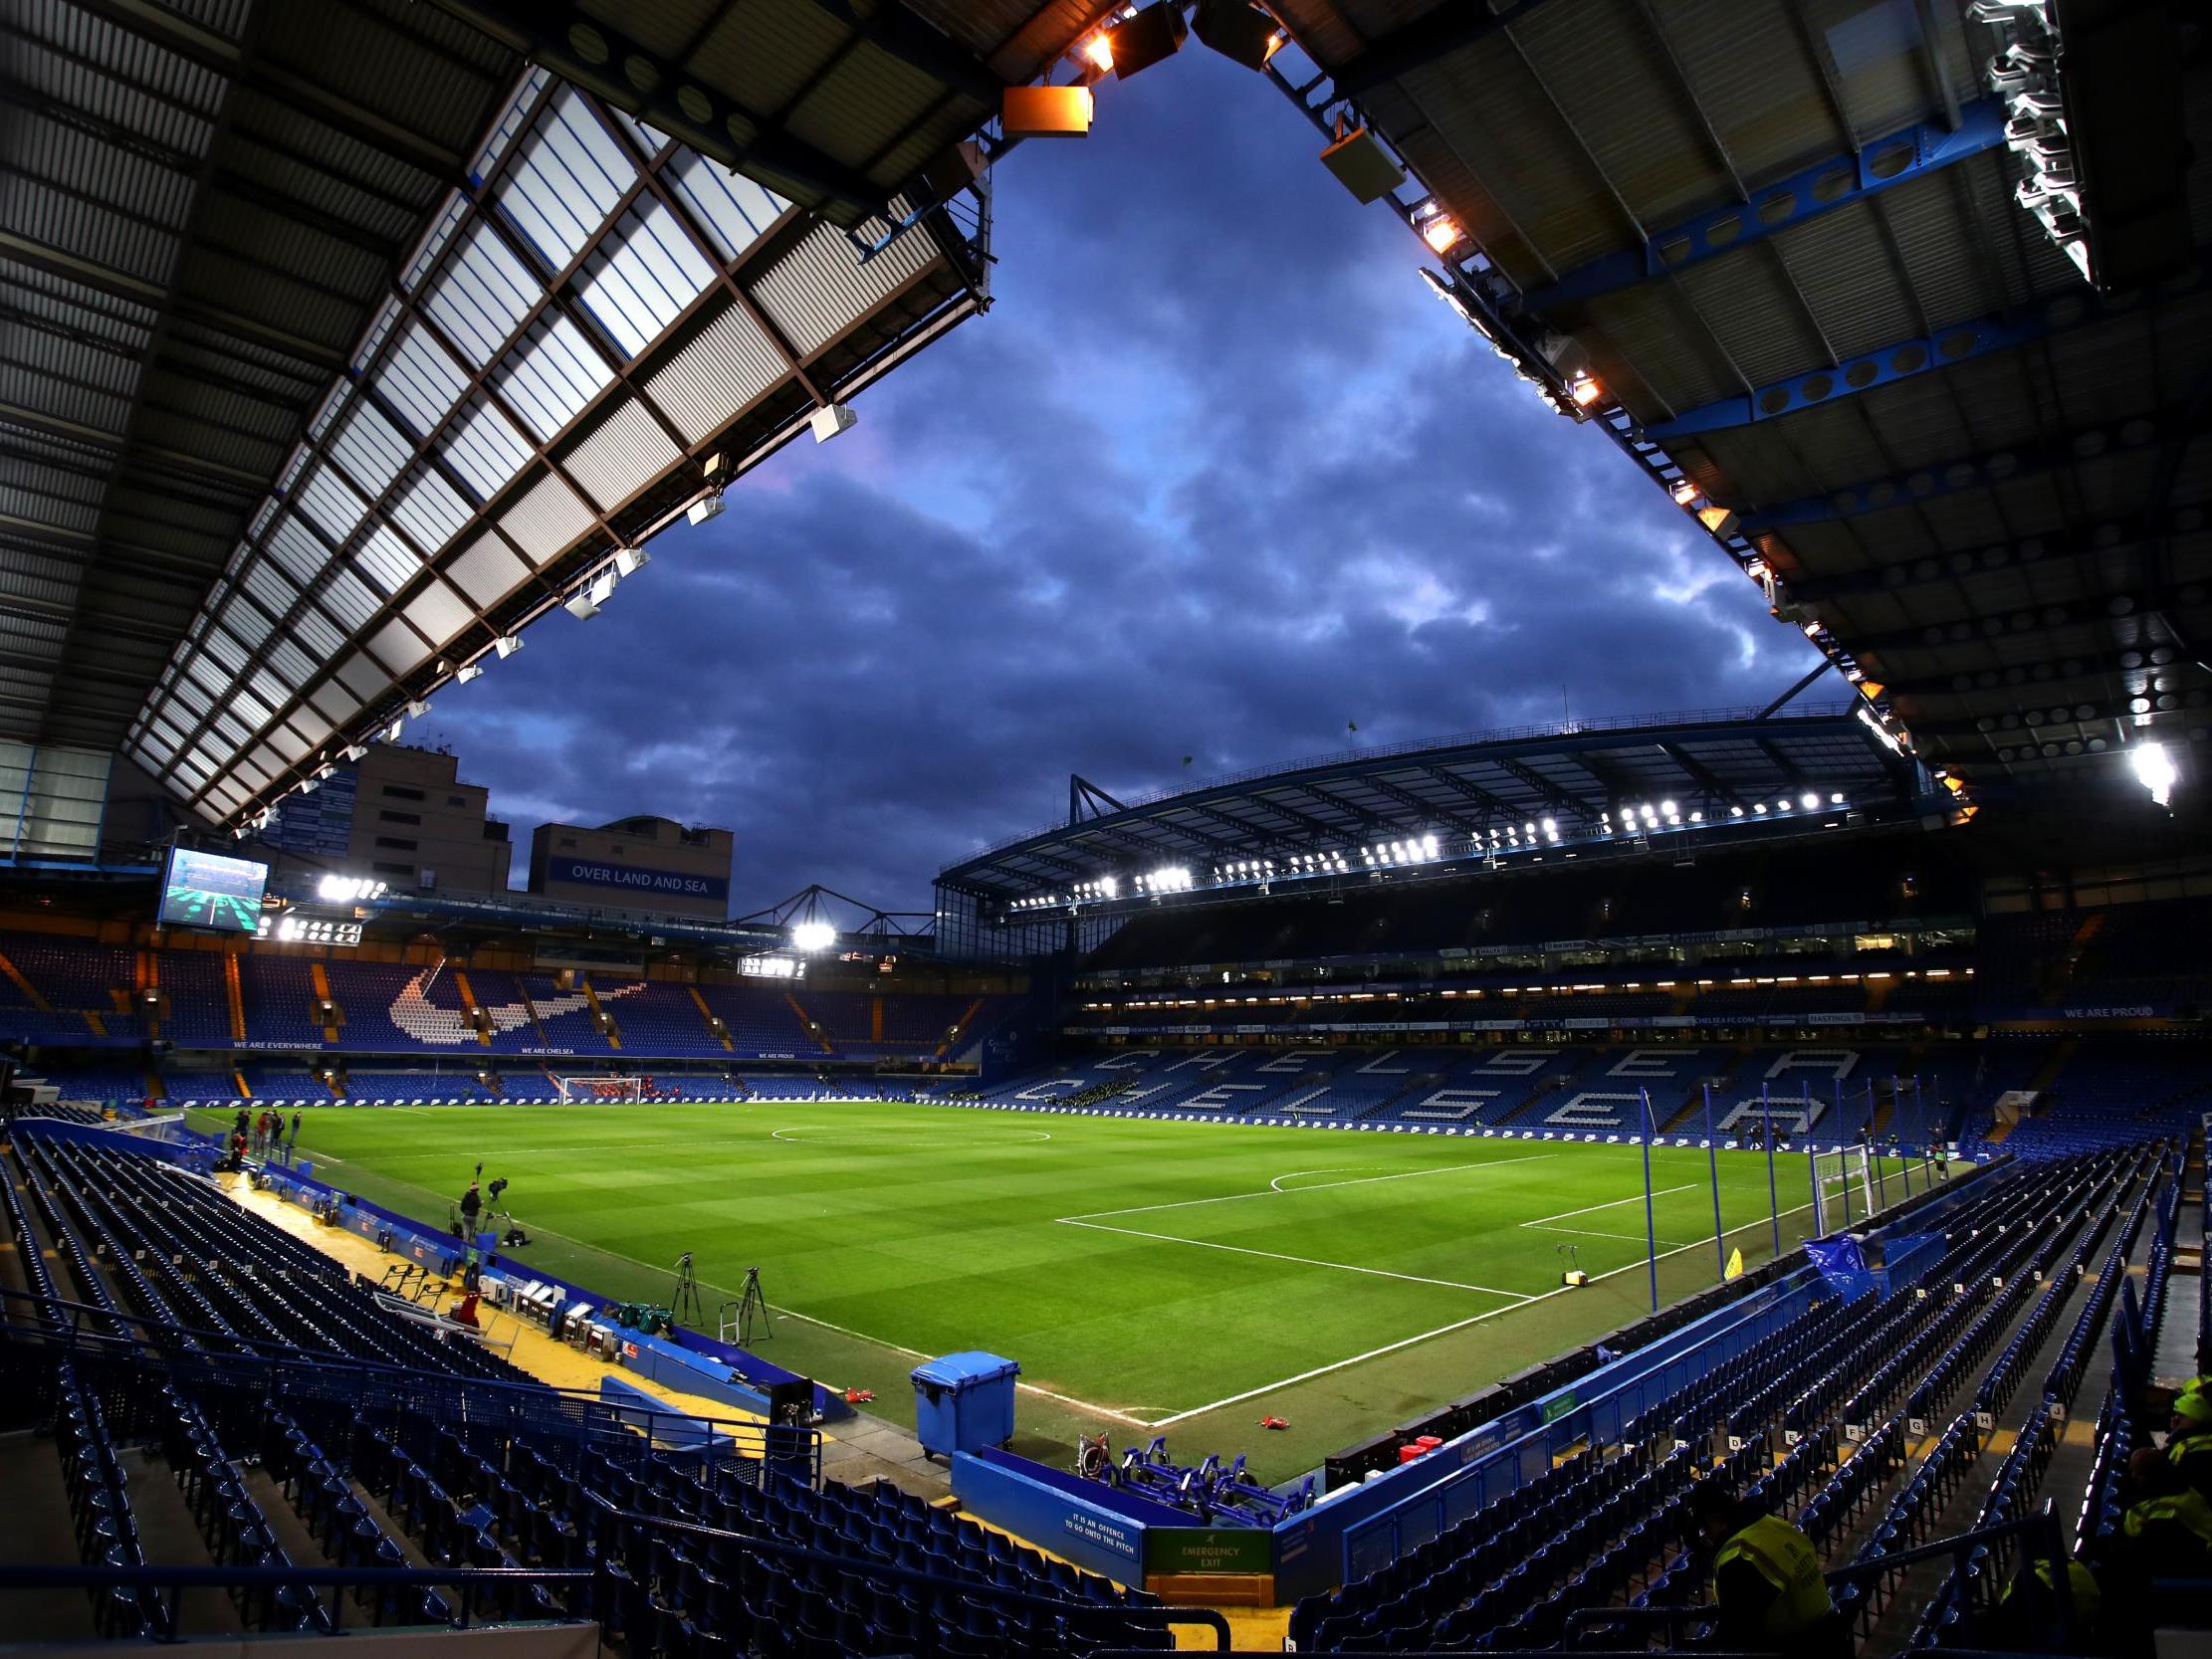 Under the Uefa’s disciplinary proceedings, Chelsea faced the prospect of having part of Stamford Bridge closed